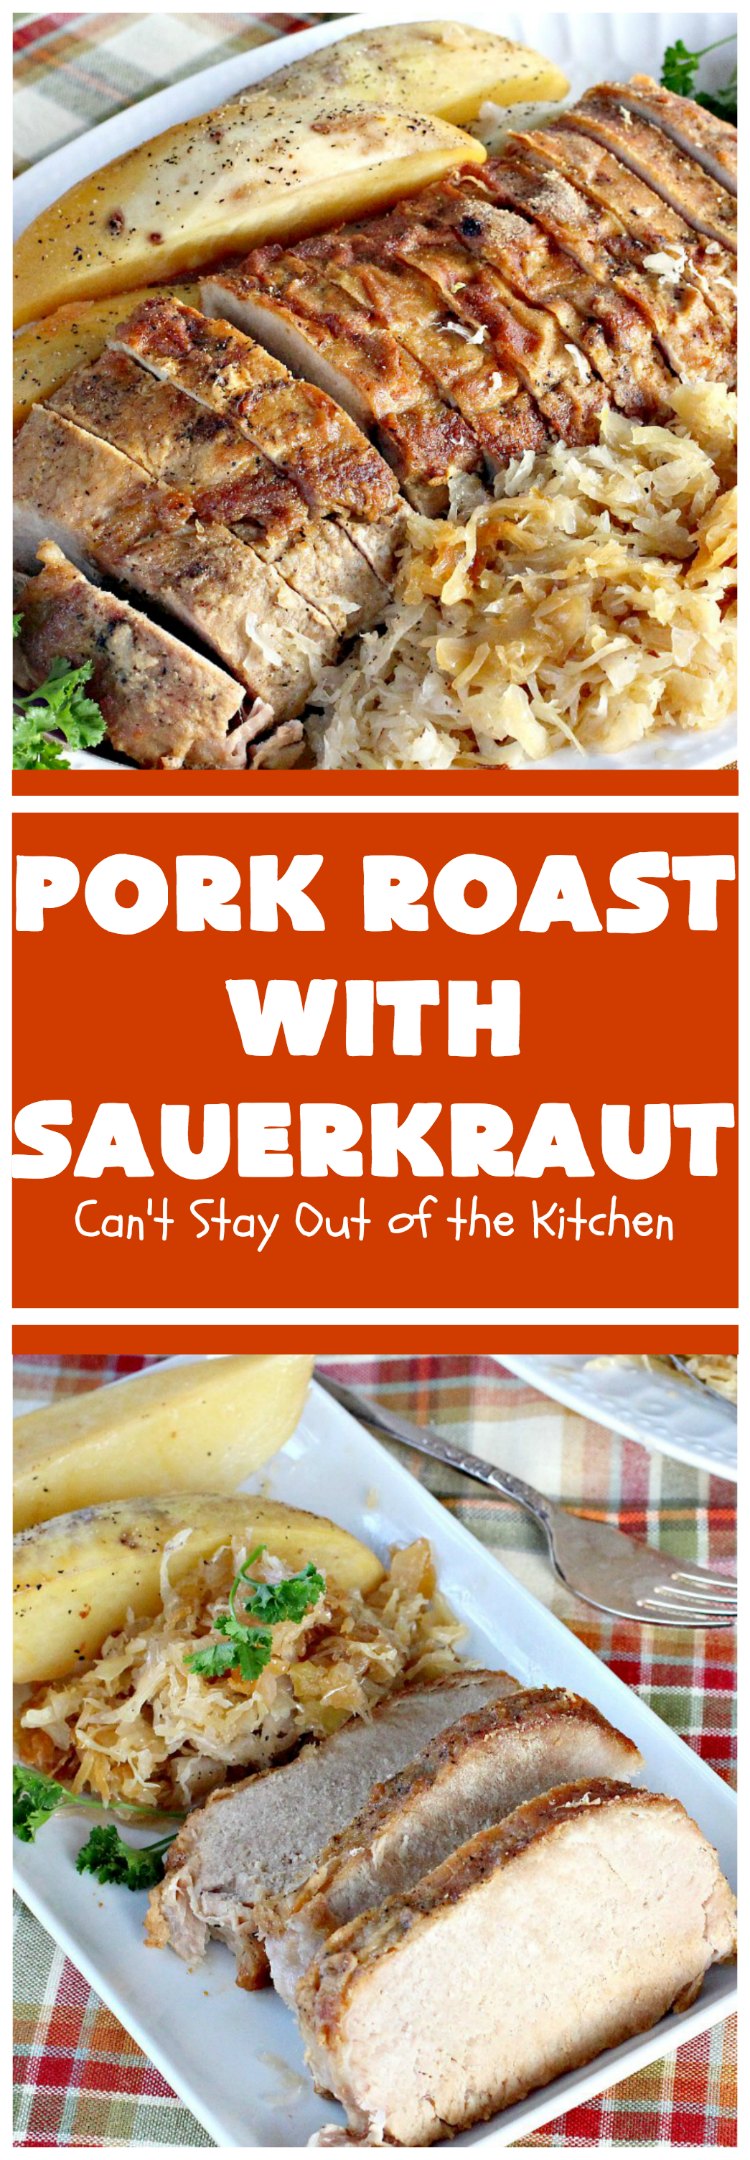 Pork Roast with Sauerkraut - Can't Stay Out of the Kitchen